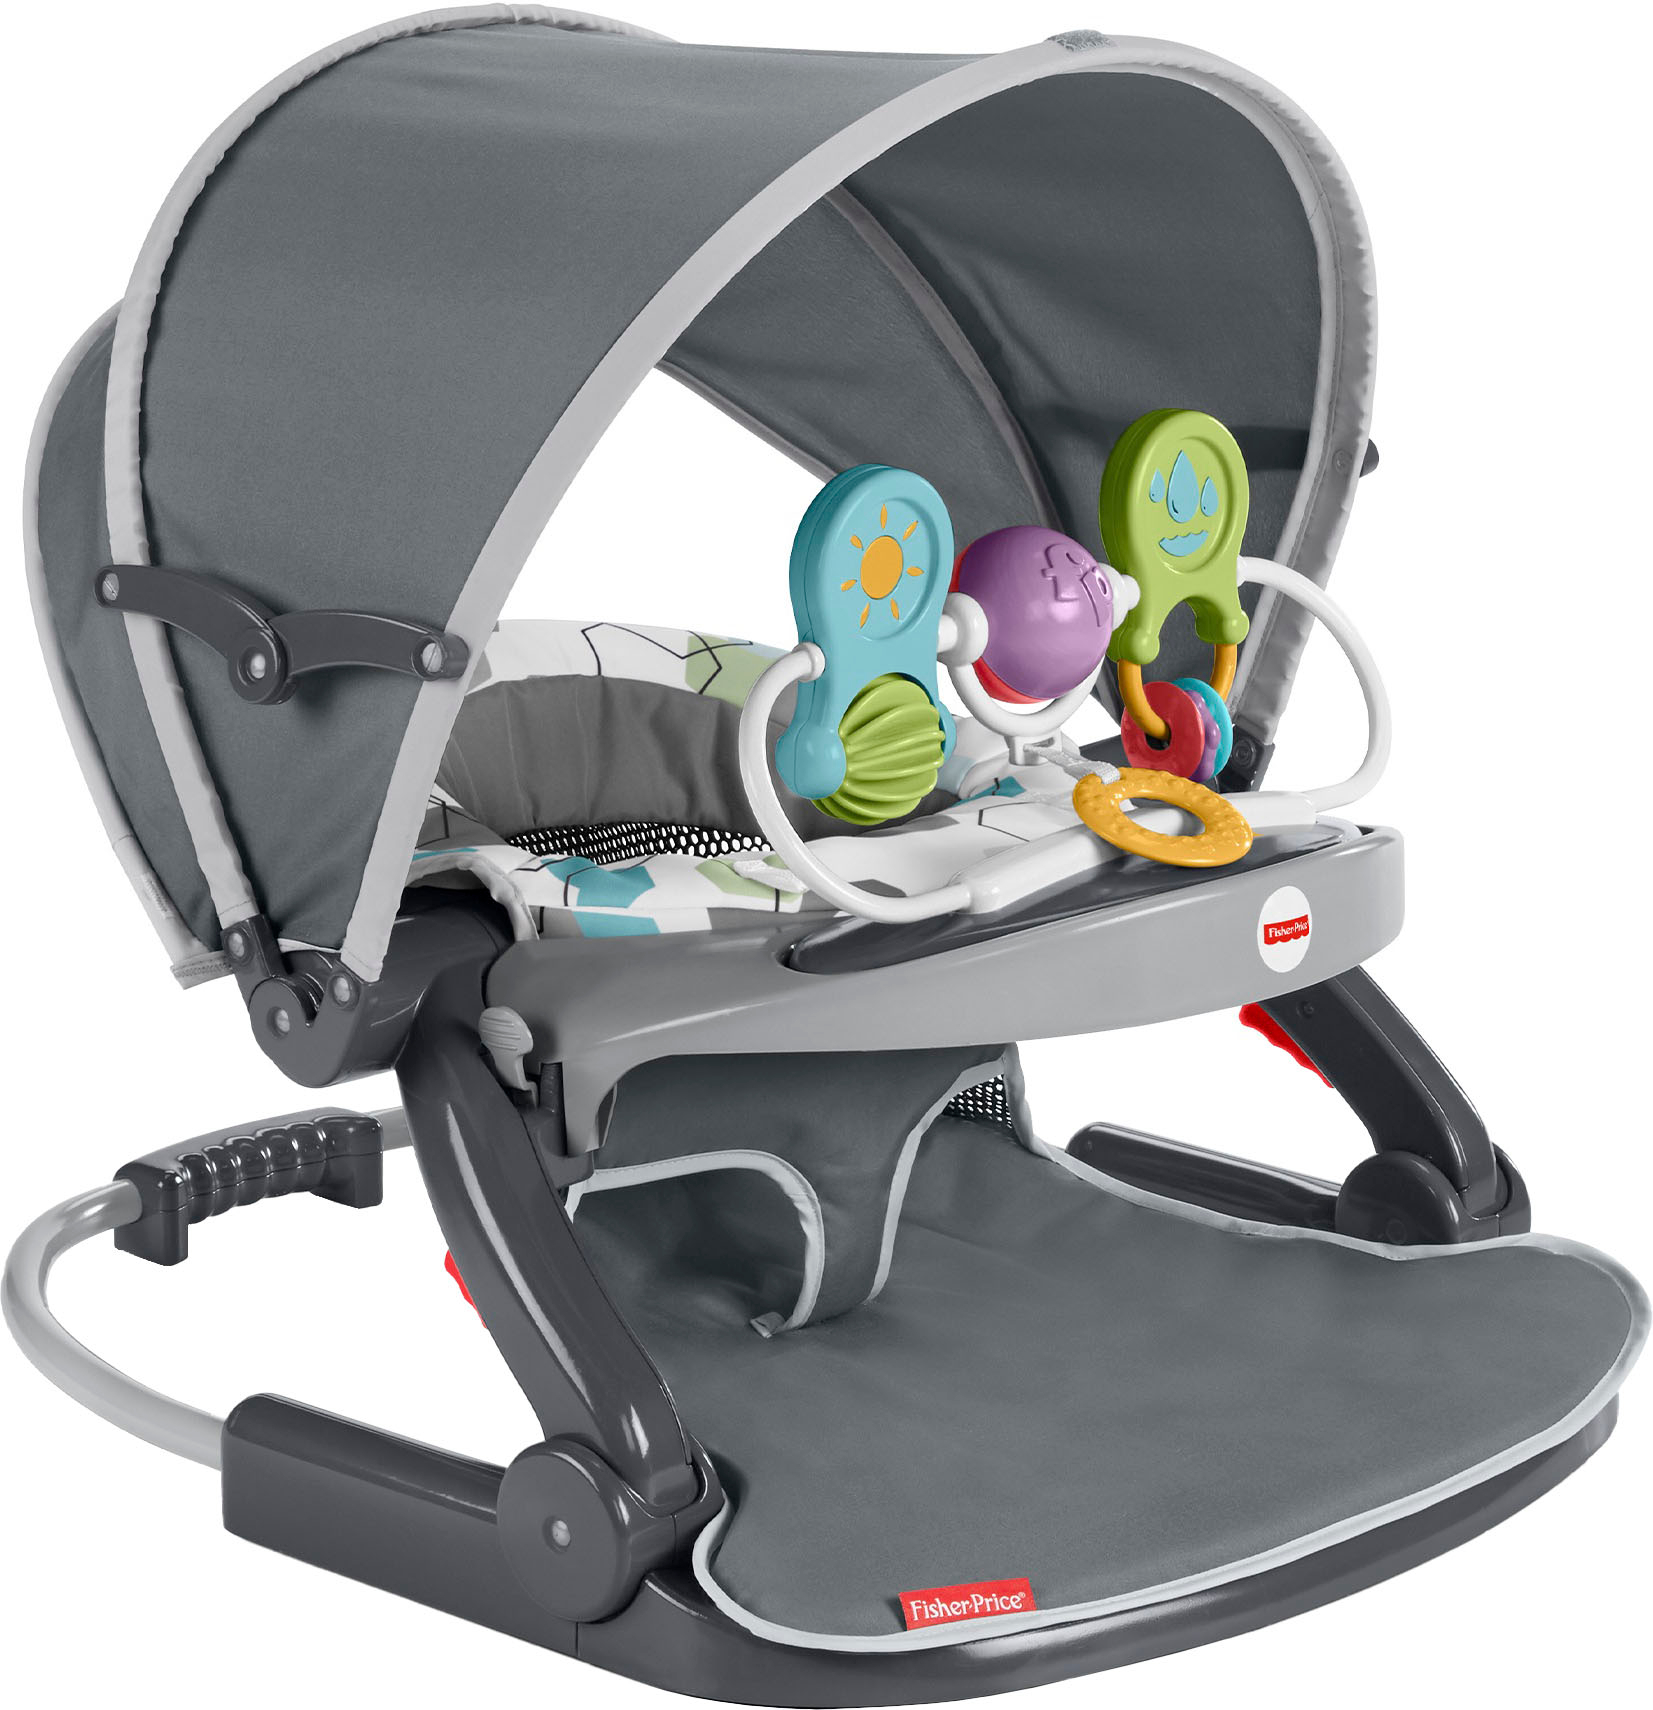 Left View: Fisher-Price - On-the-Go Sit-Me-Up Infant Floor Seat - Gray Hexagon